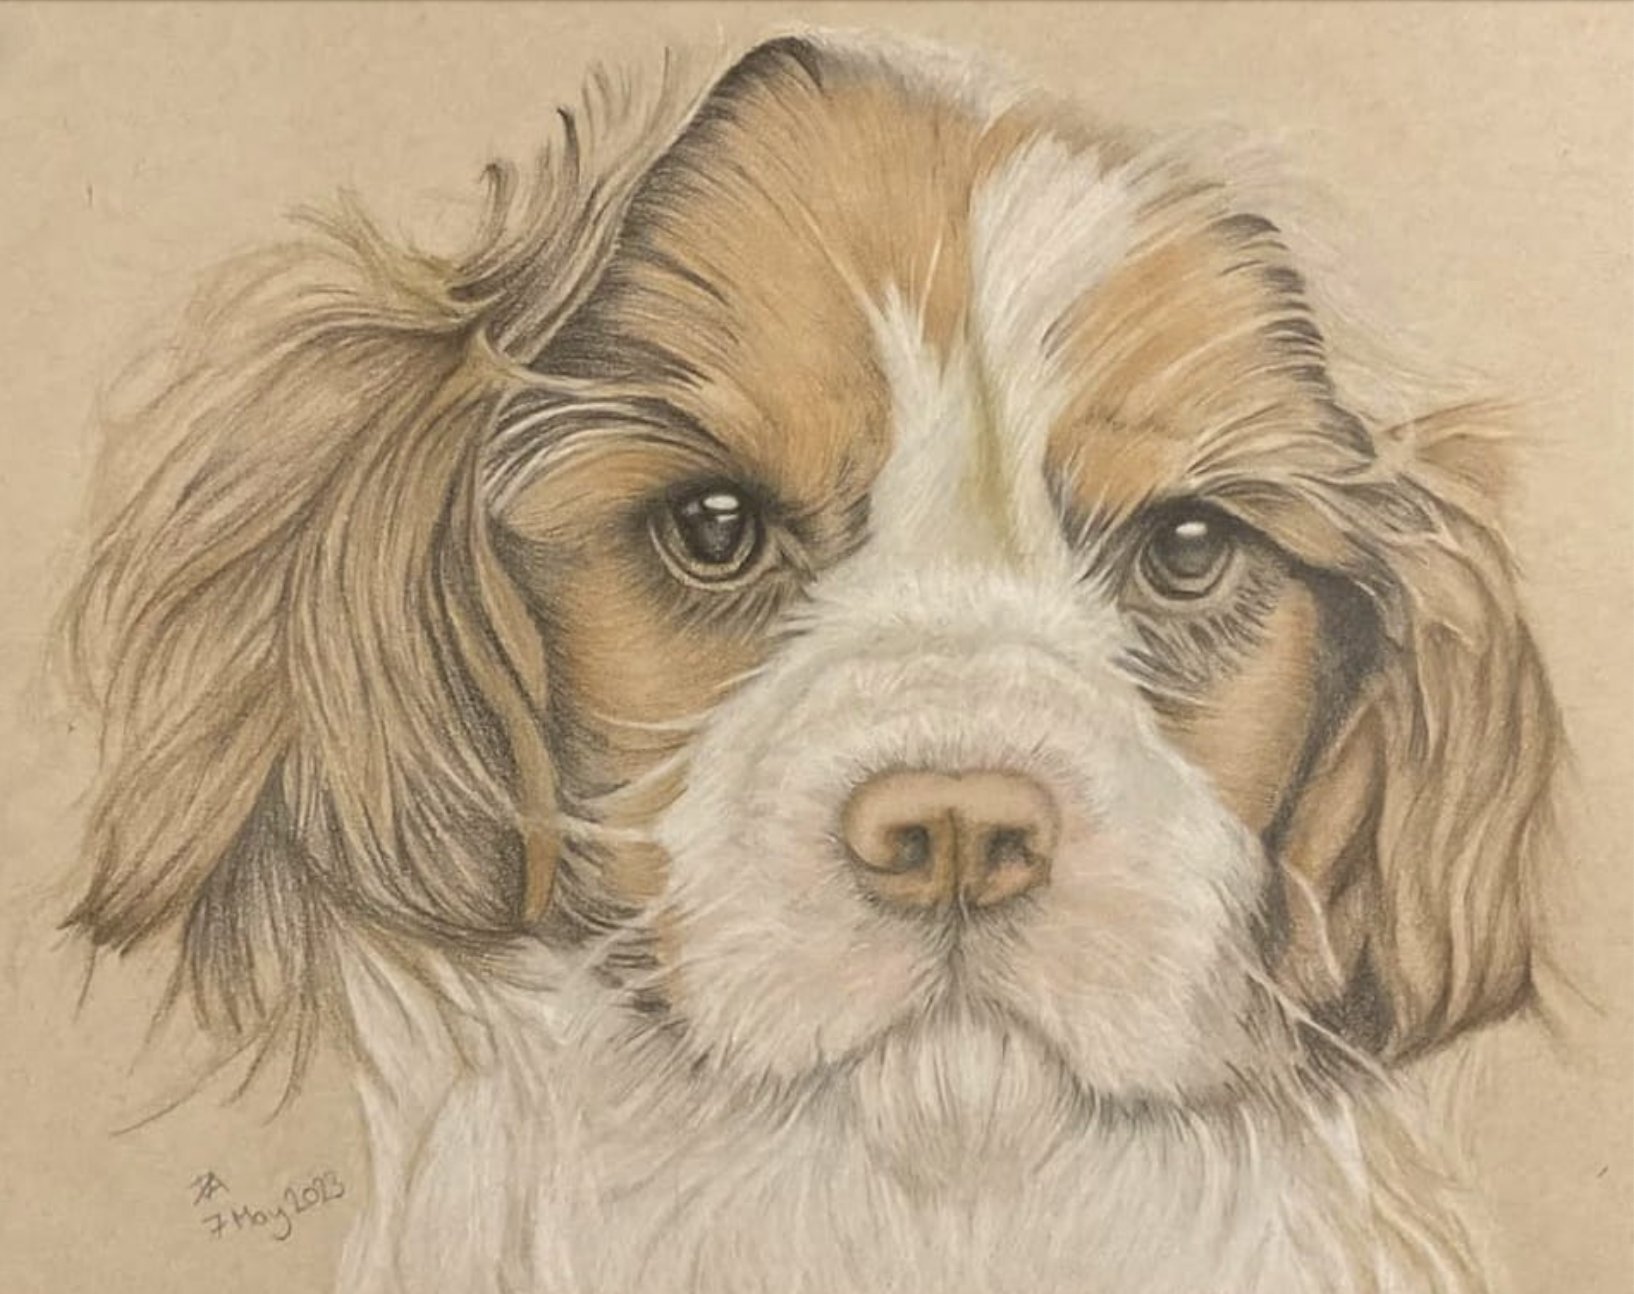 HISCOCK_DEBORAH_KING CHARLES SPANIEL_STRATHMORE TONED TAN PAPER_22.9X30.5 INCHES.png